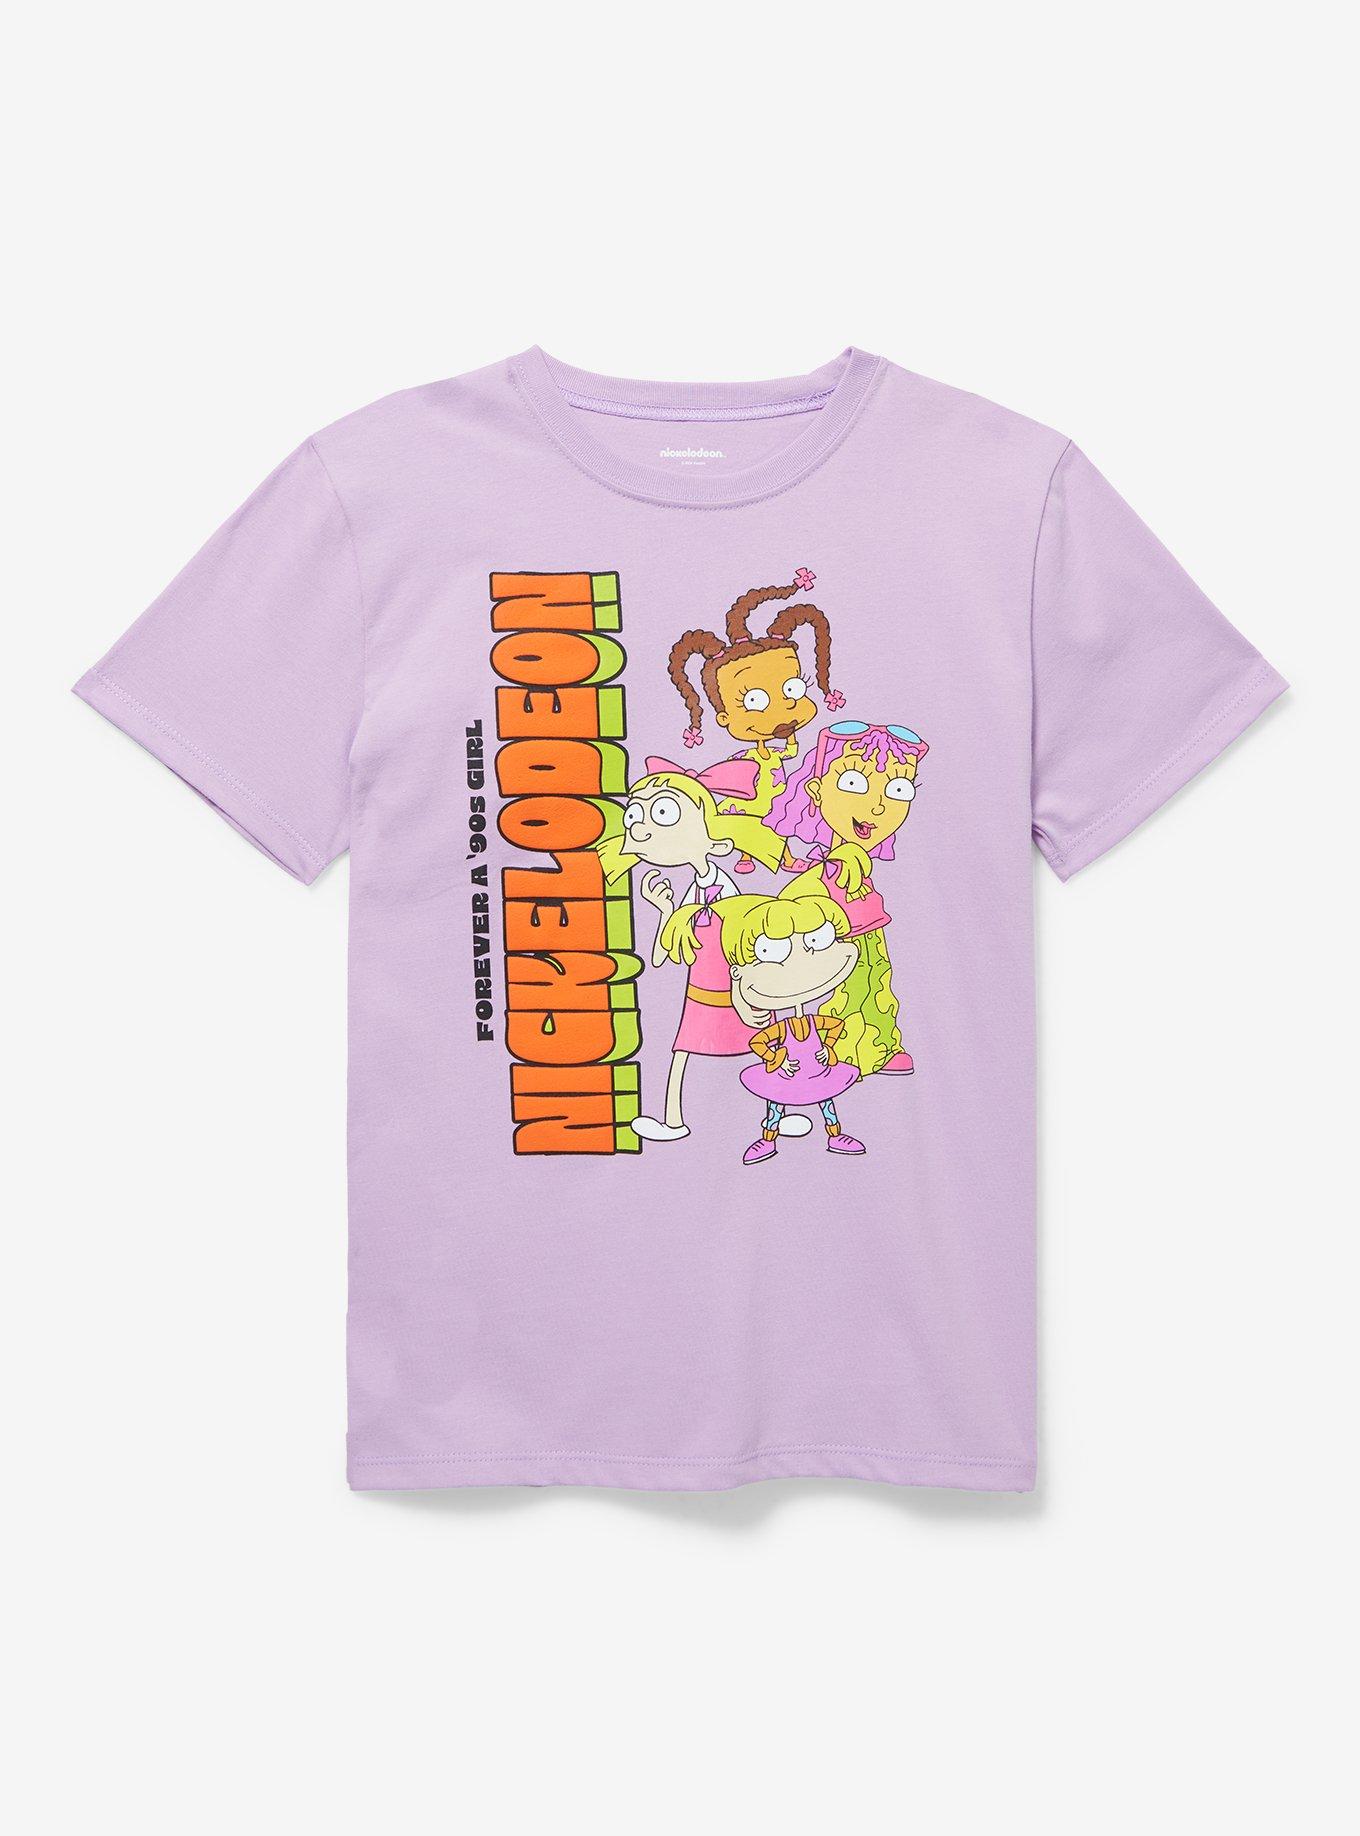 Nickelodeon Cartoon Girls Group Portrait Youth T-Shirt - BoxLunch Exclusive, MULTI, hi-res